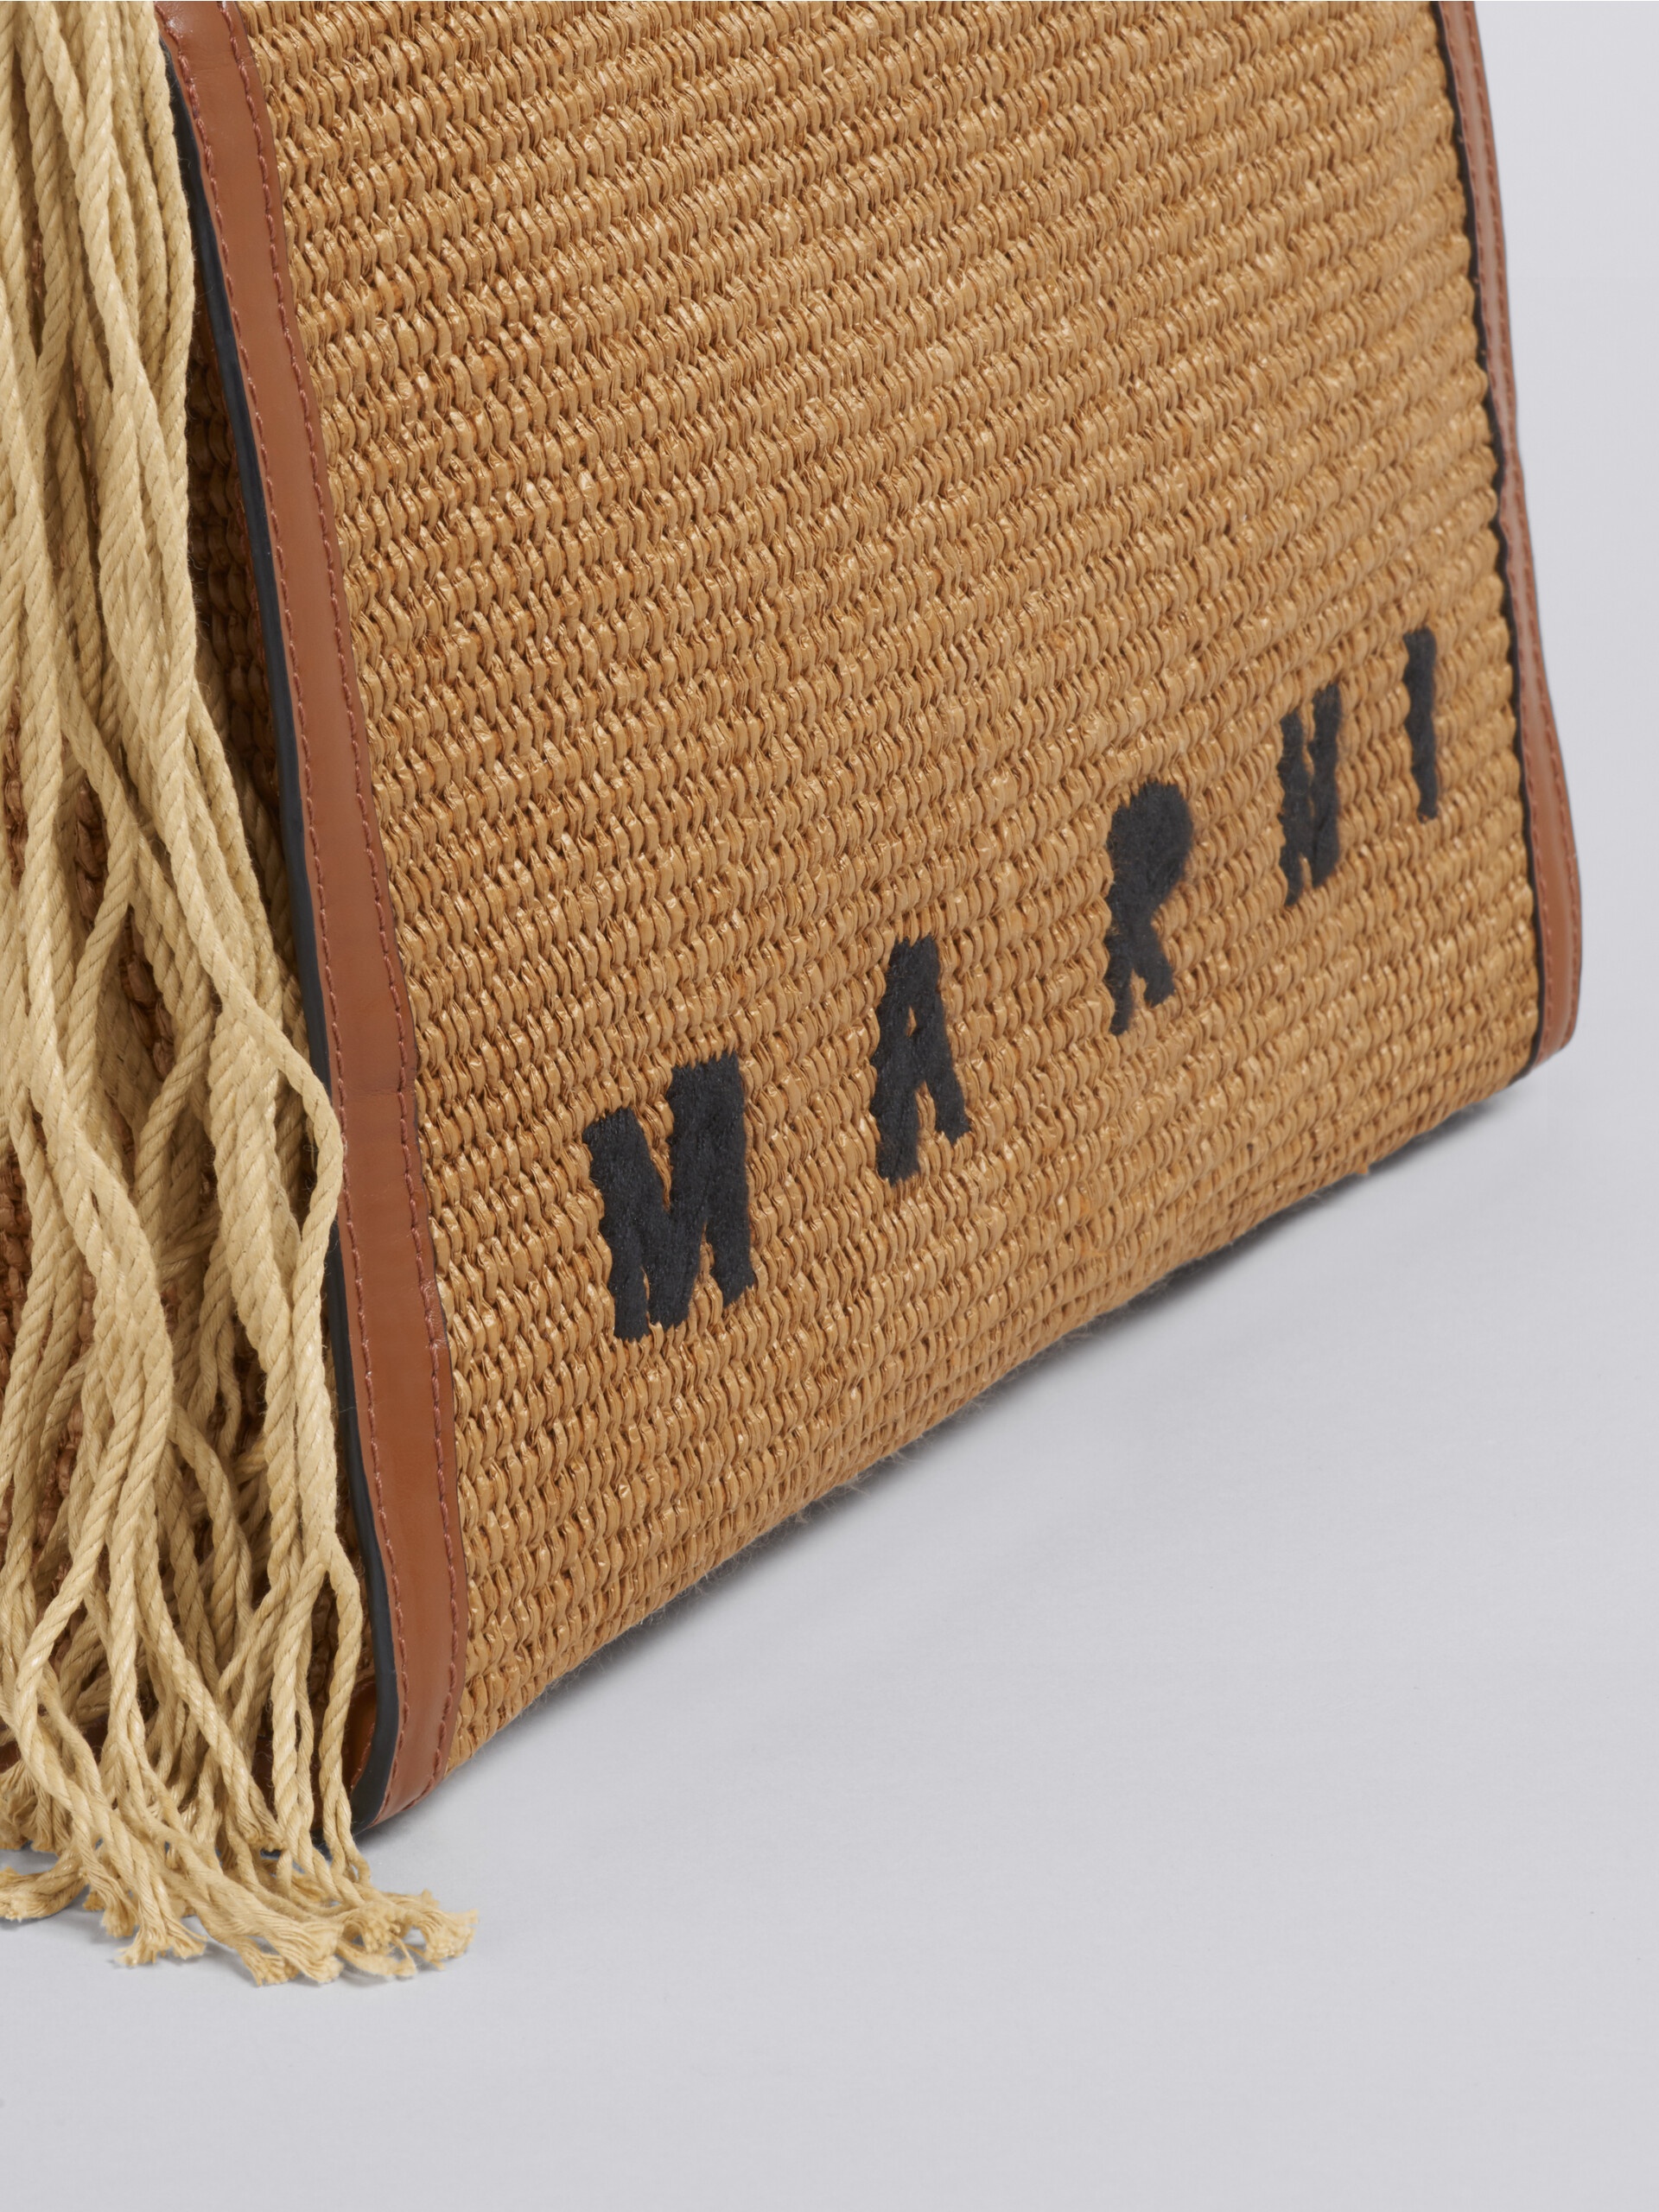 EAST-WEST MATTING SHOPPING BAG WITH FRAYED ROPE HANDLES - 4